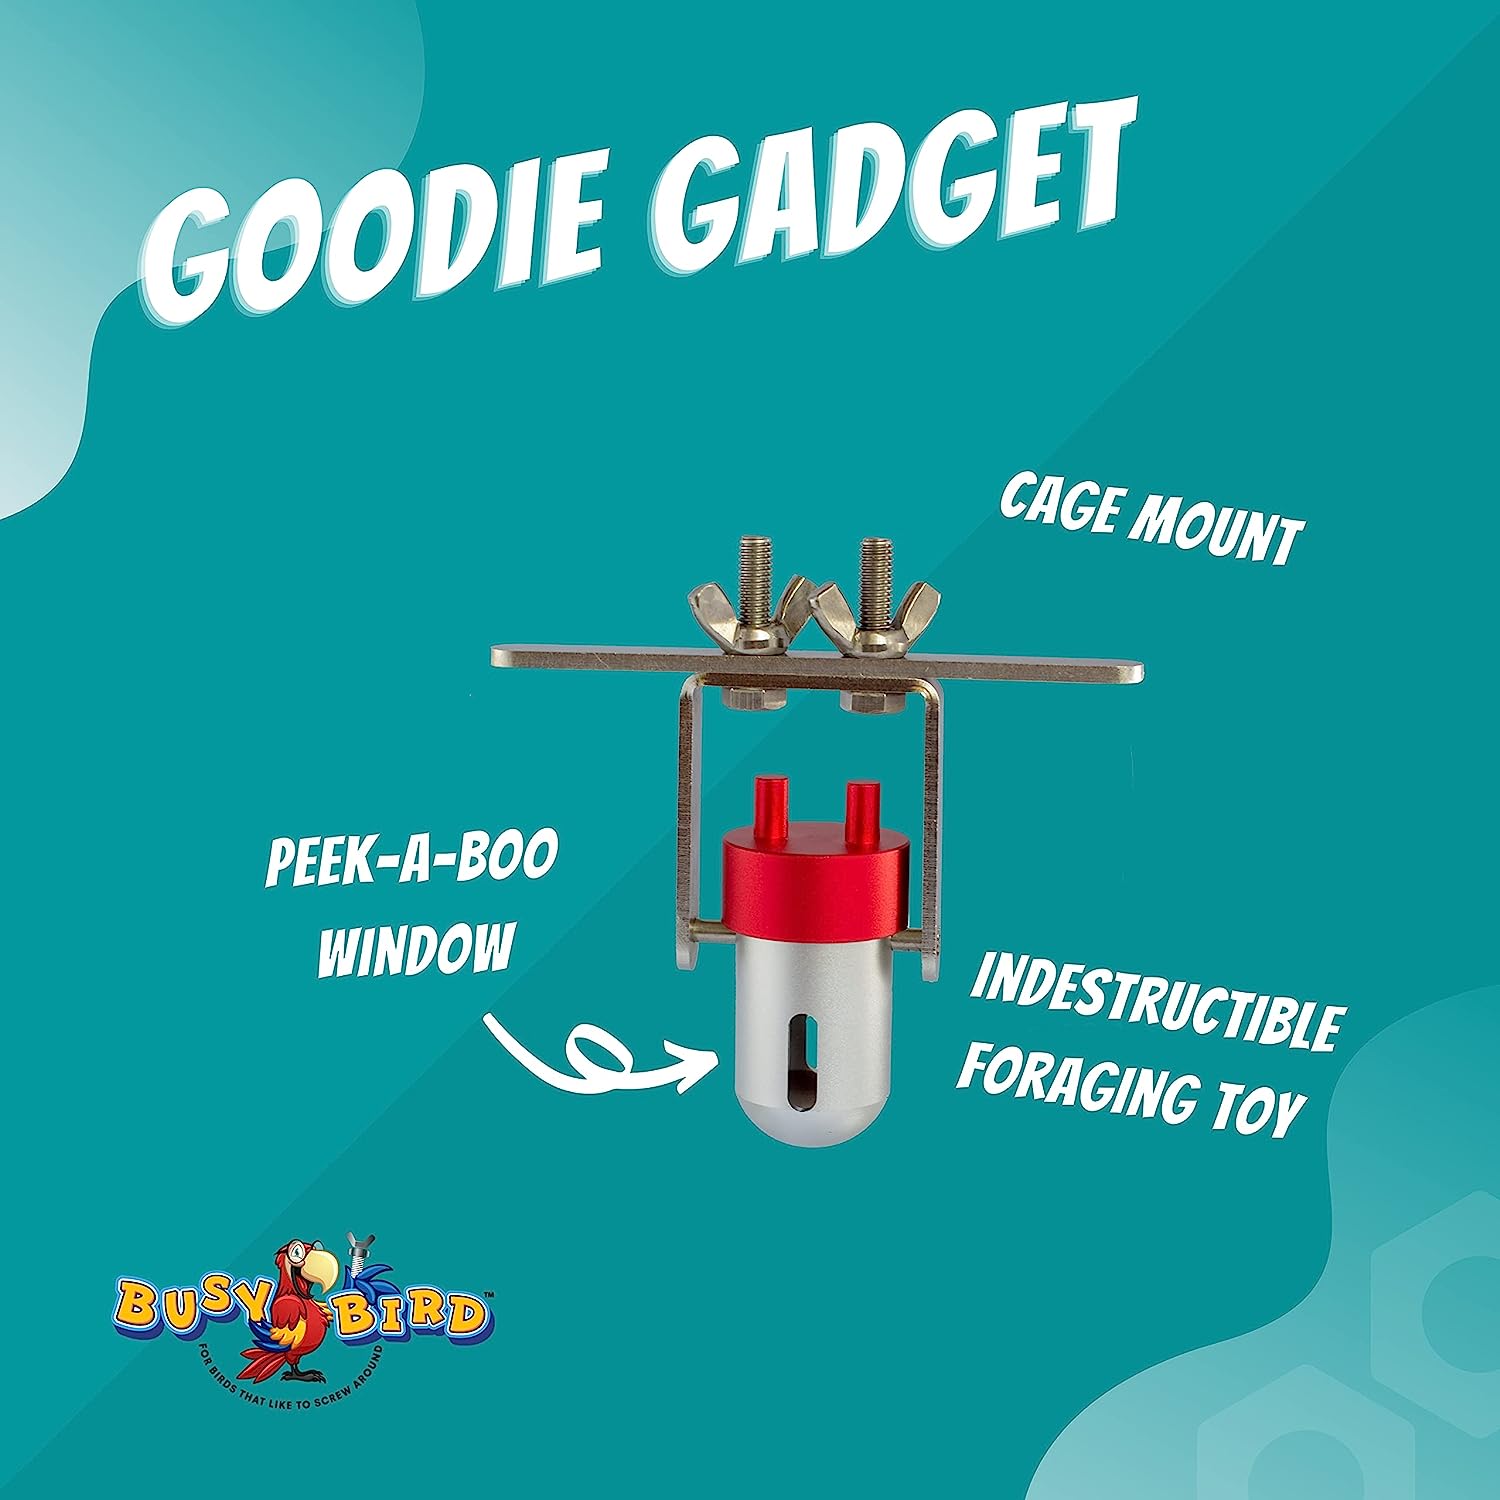 Goodie Gadget by Busy Bird